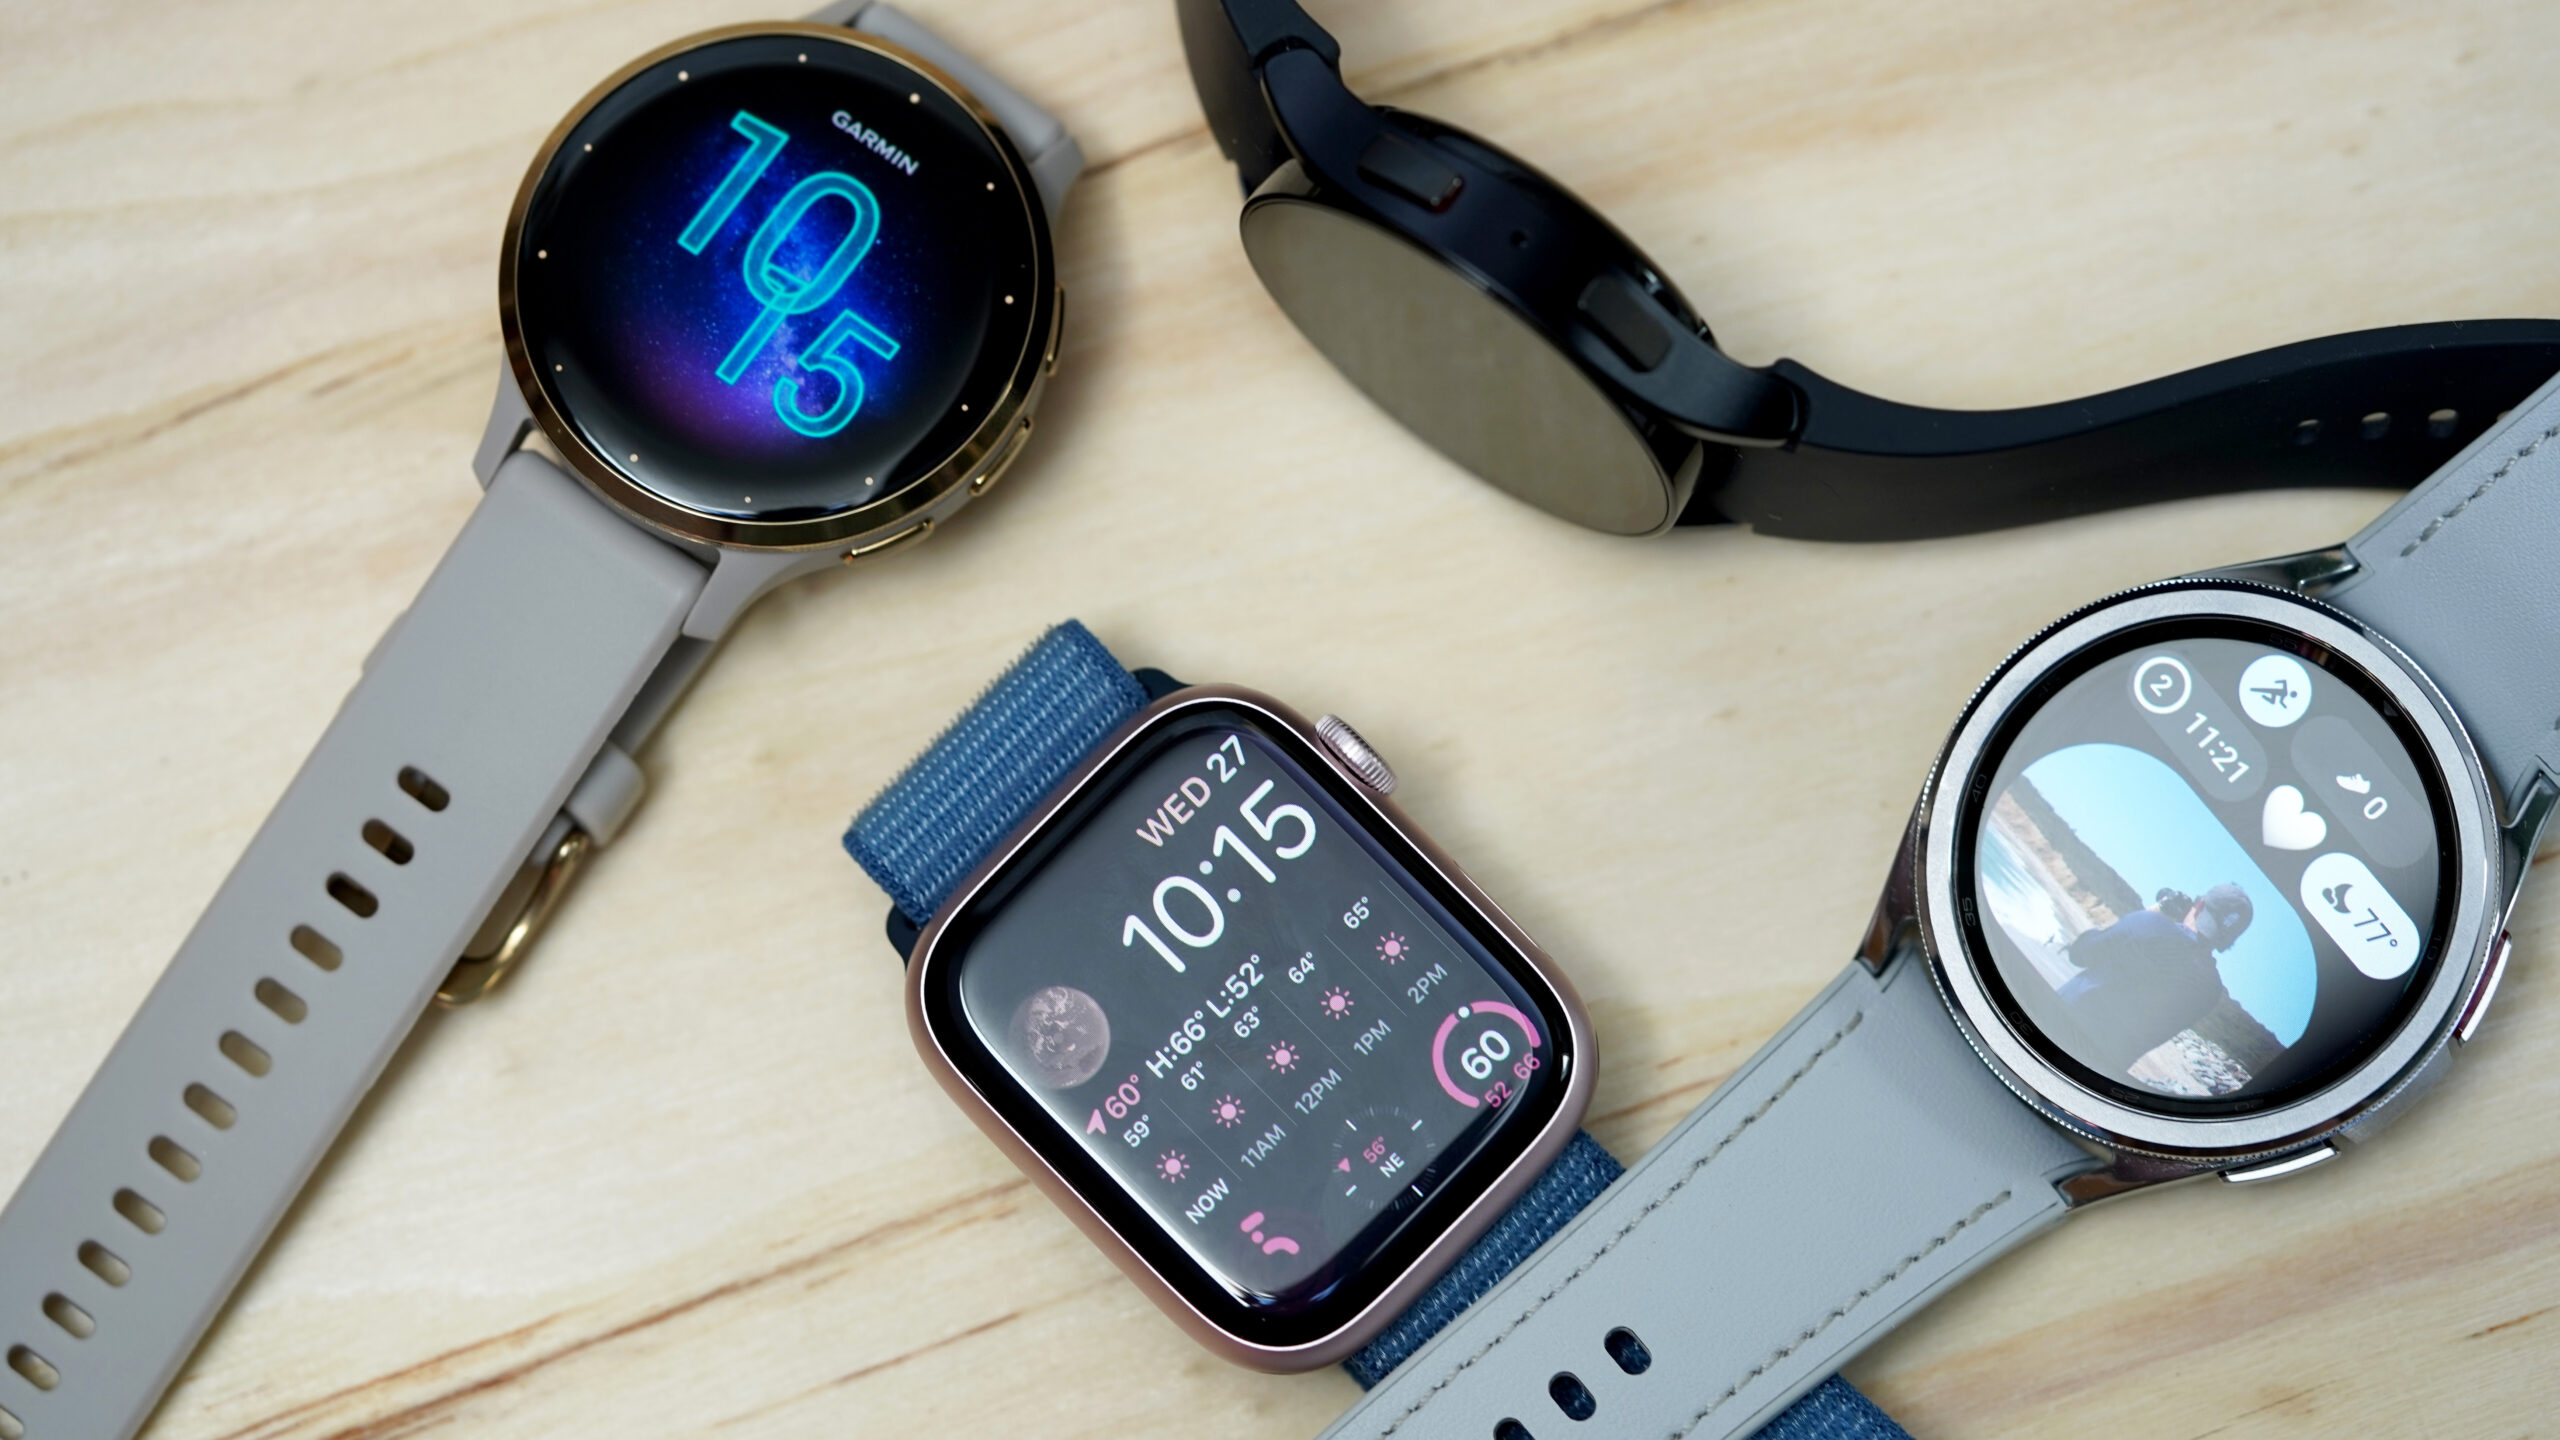 A variety of alternative smartwatches rest on a wooden surface.